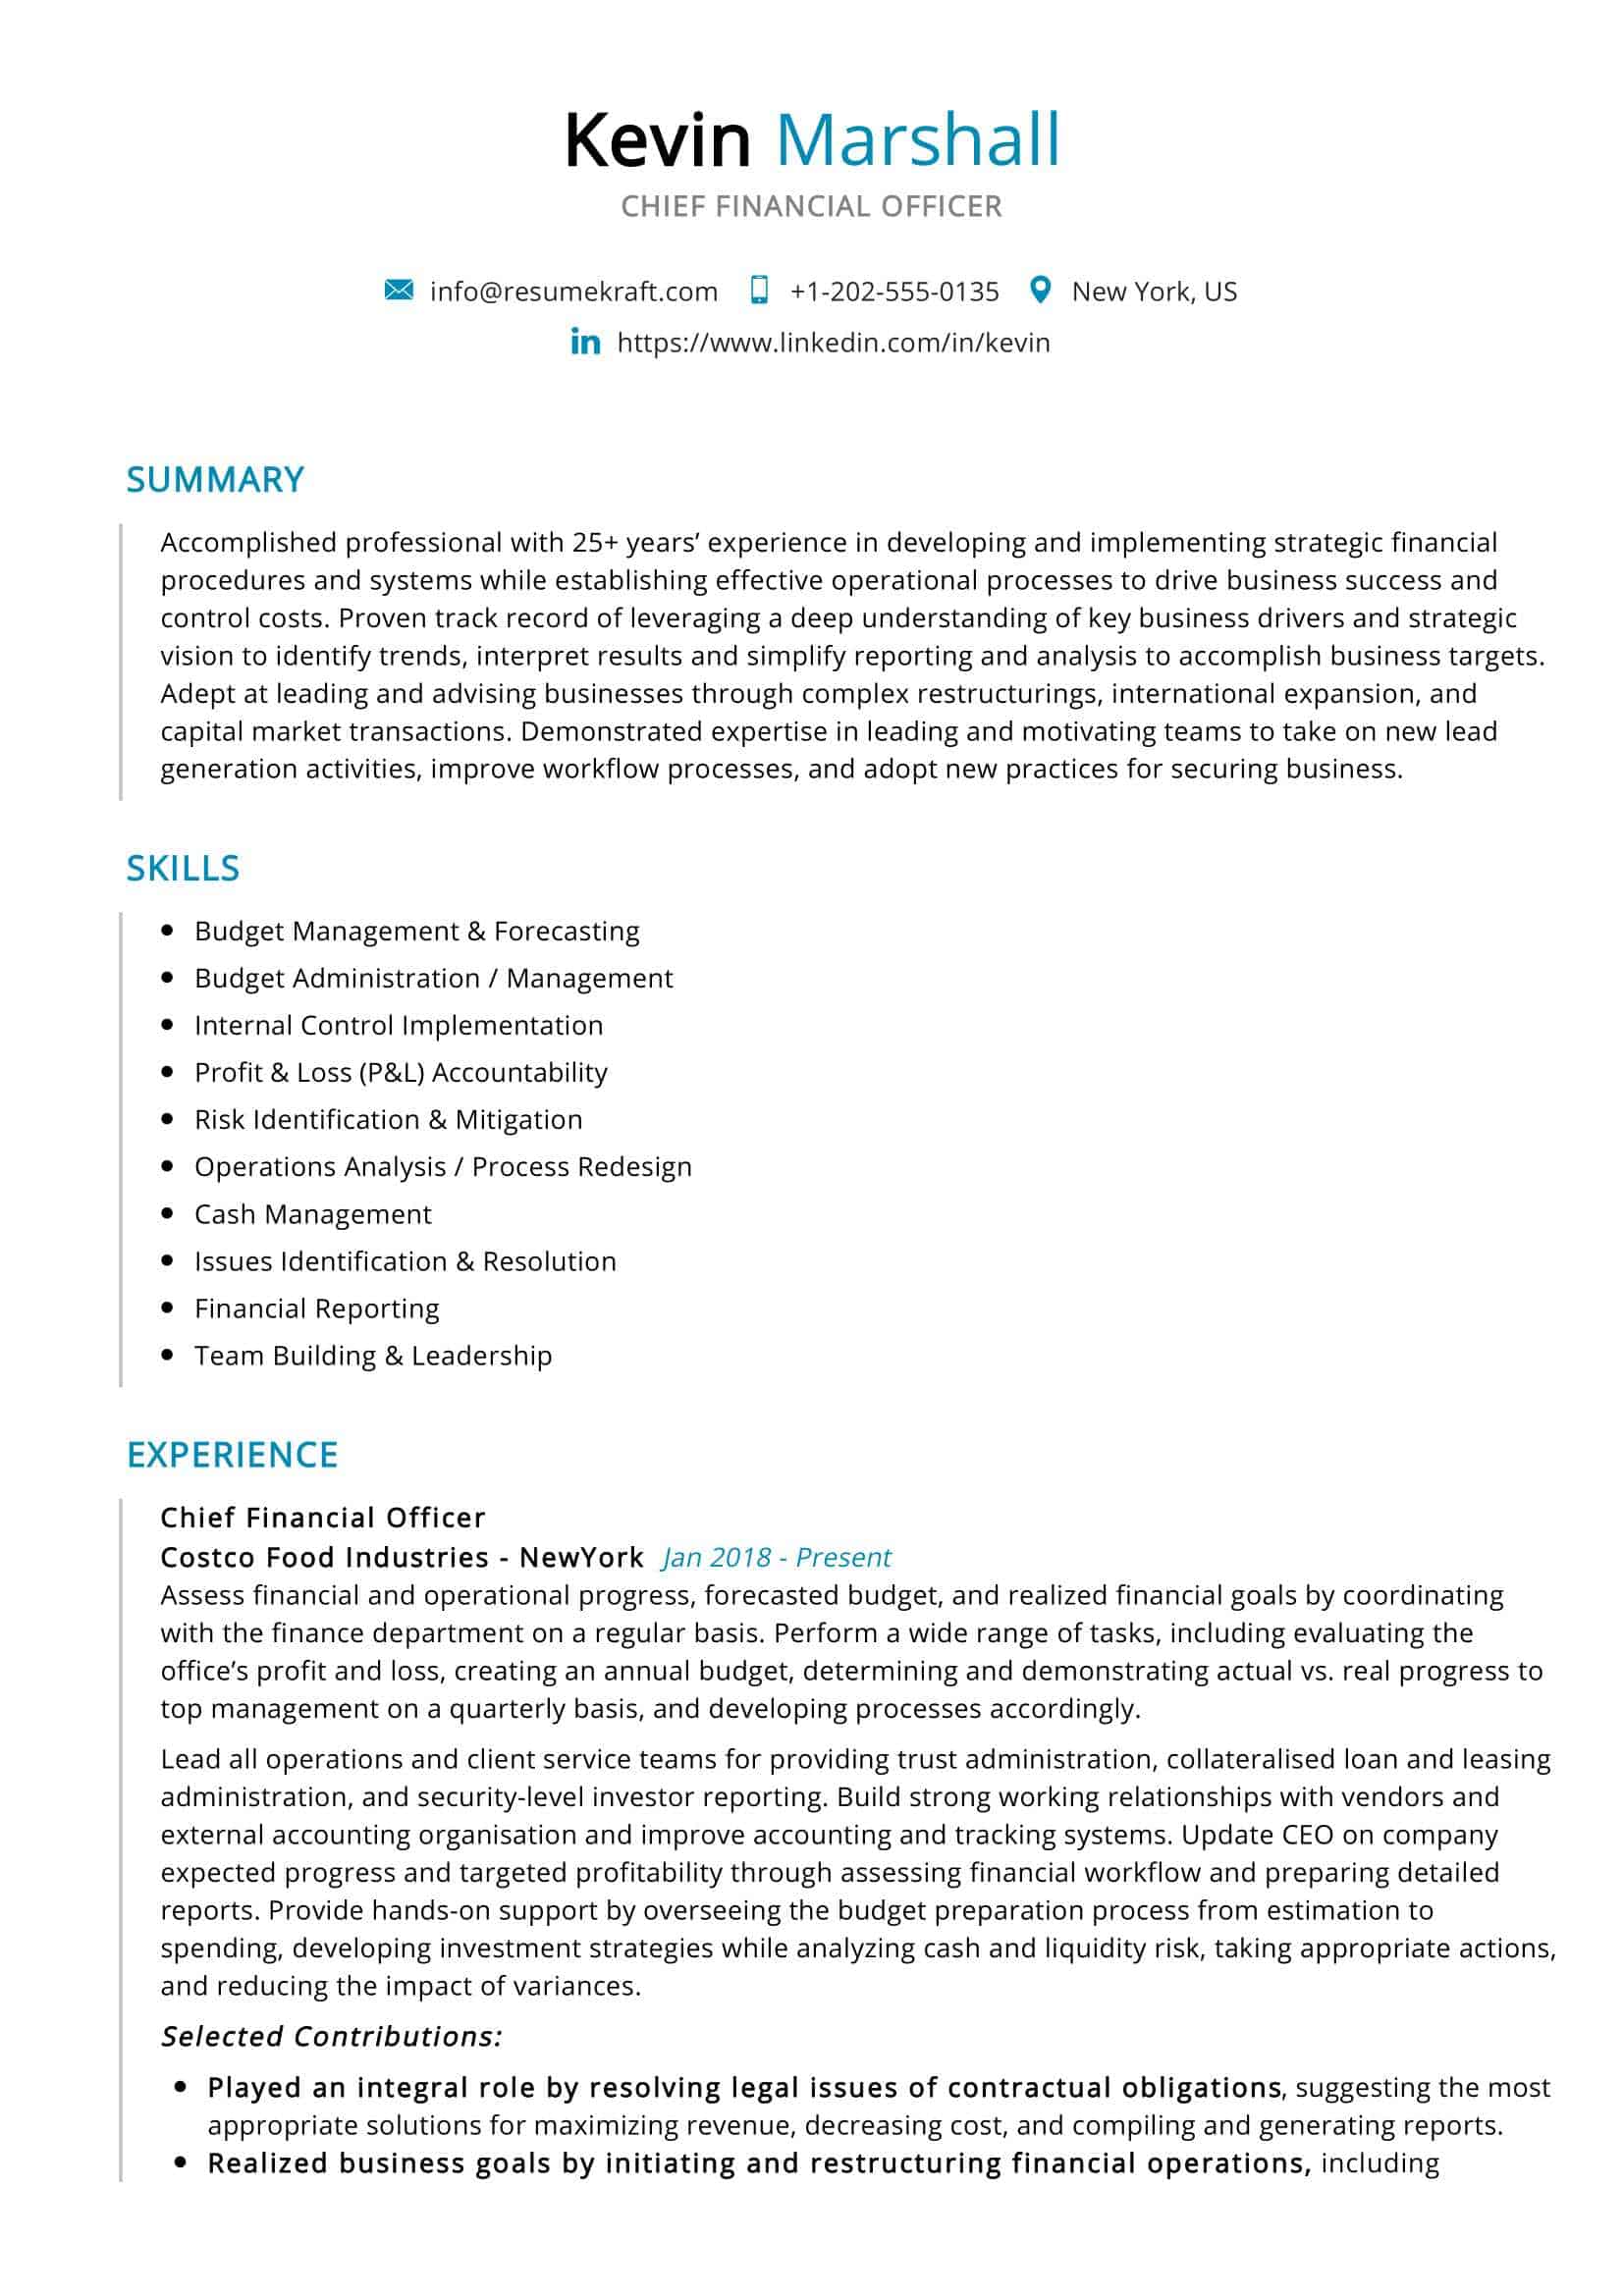 Chief Financial Officer Resume Sample